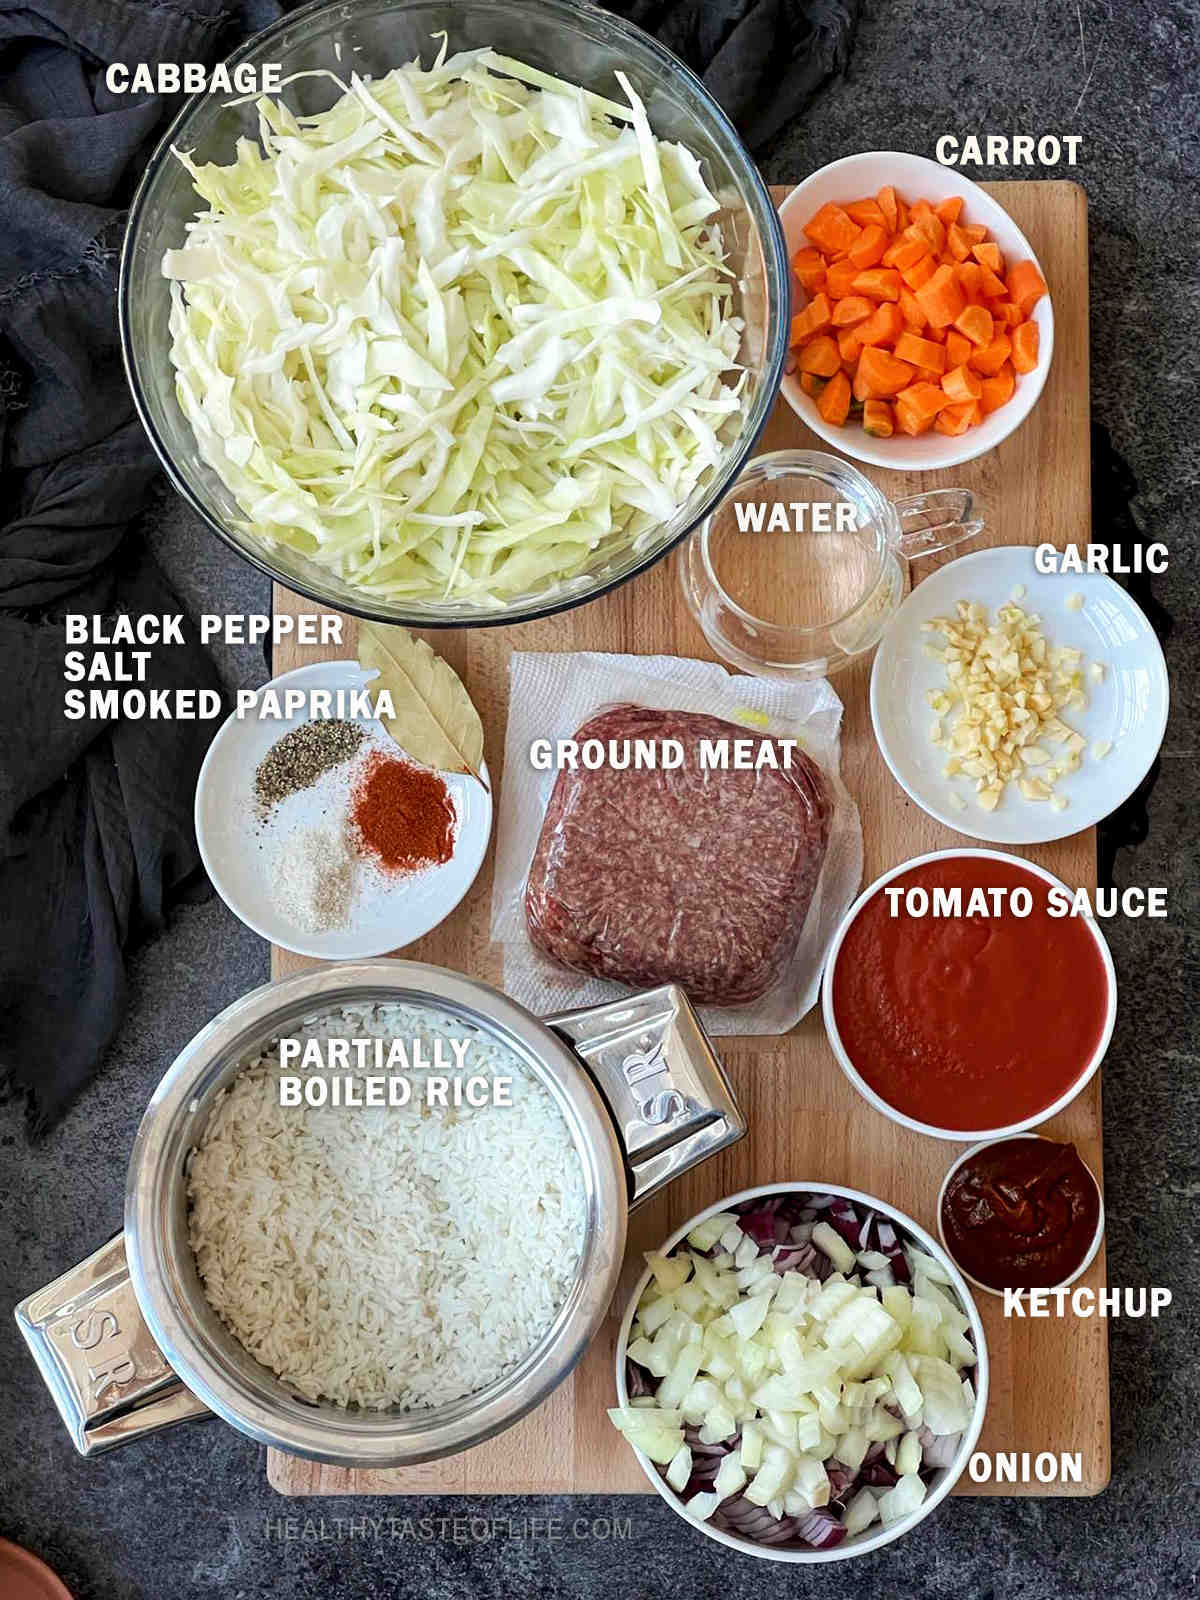 Image showing the ingredients for cabbage roll casserole recipe displayed on a board with exact measurements.